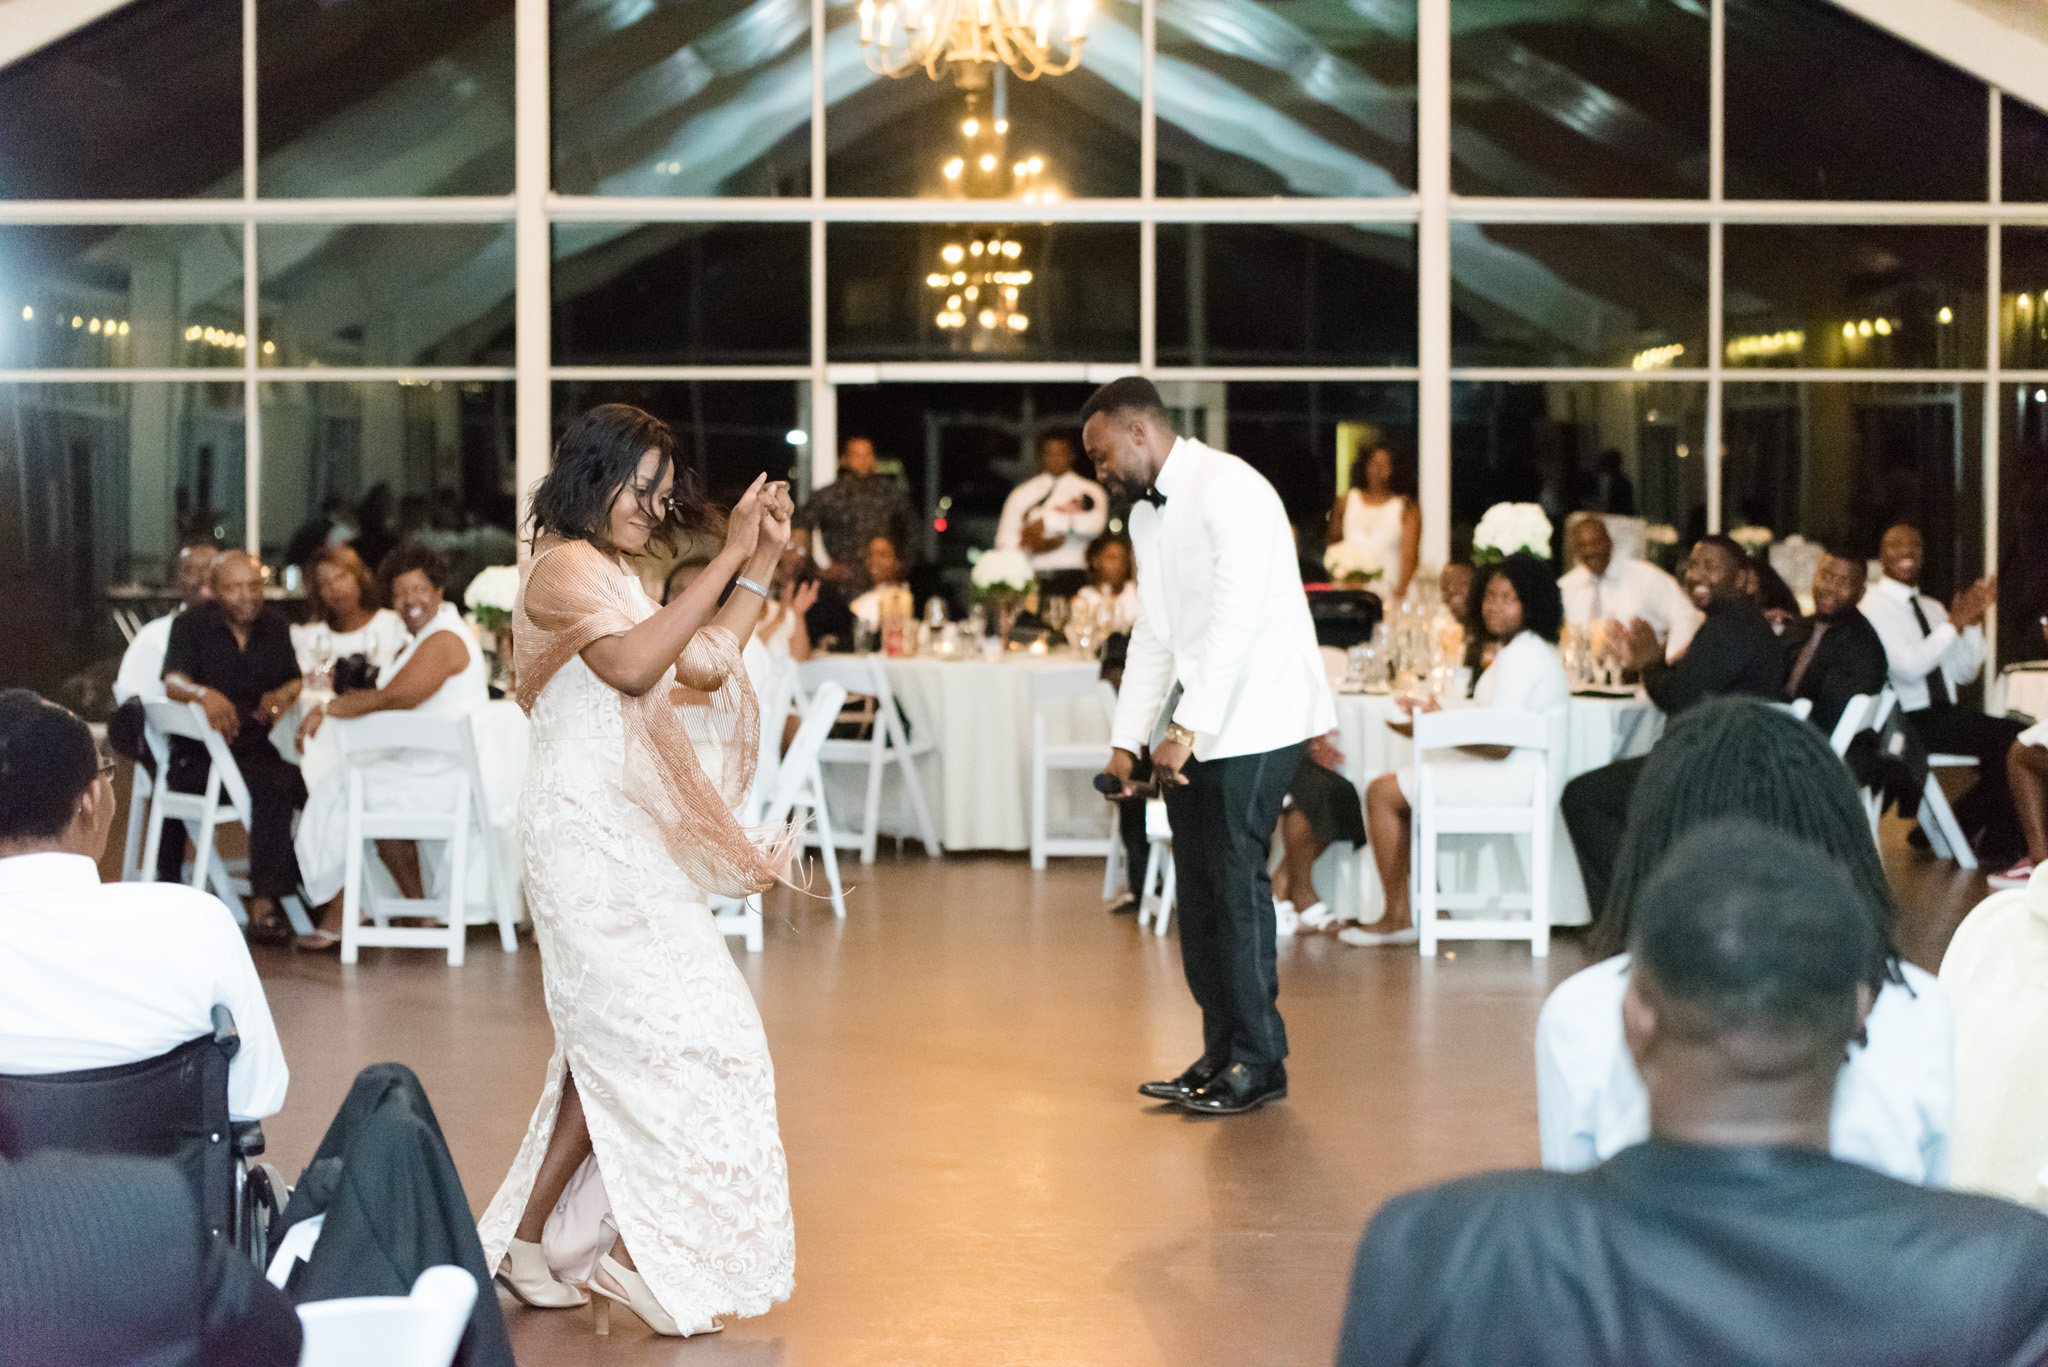 Groom and mother dance.